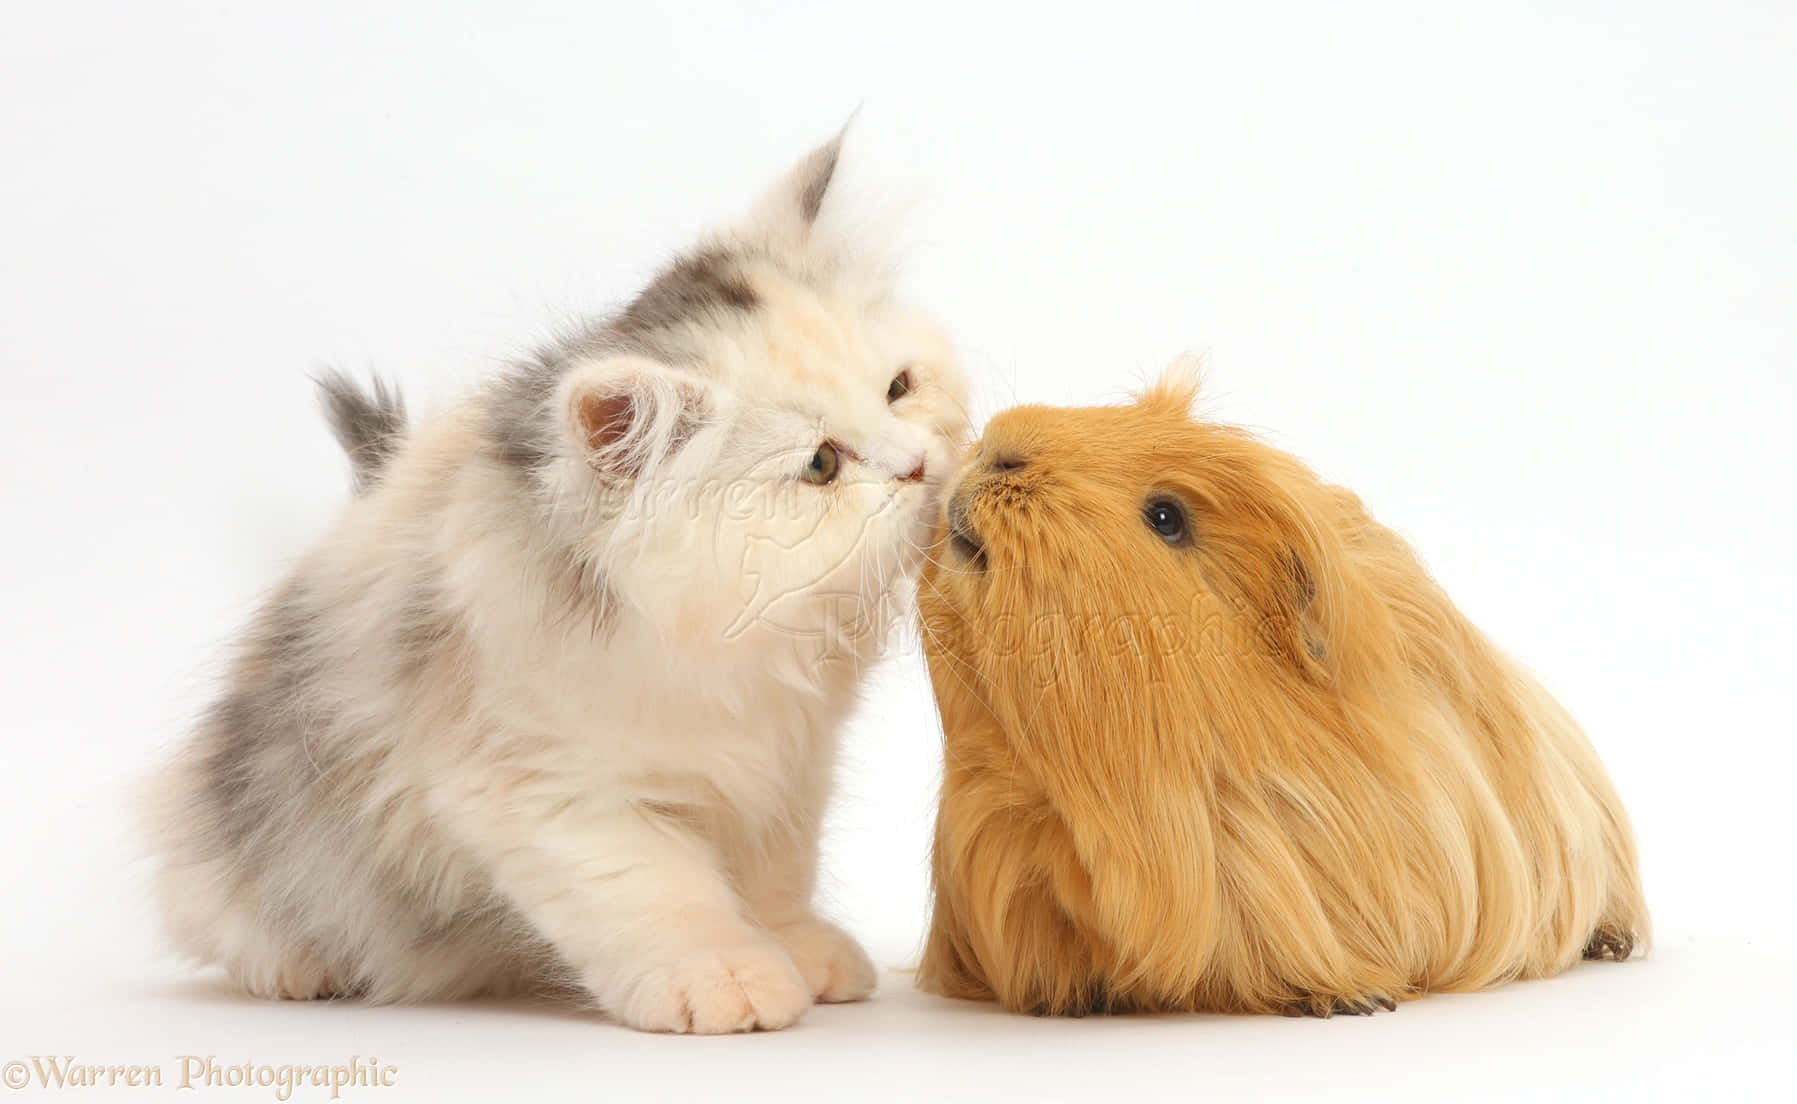 a kitten and guinea pig kissing on a white background